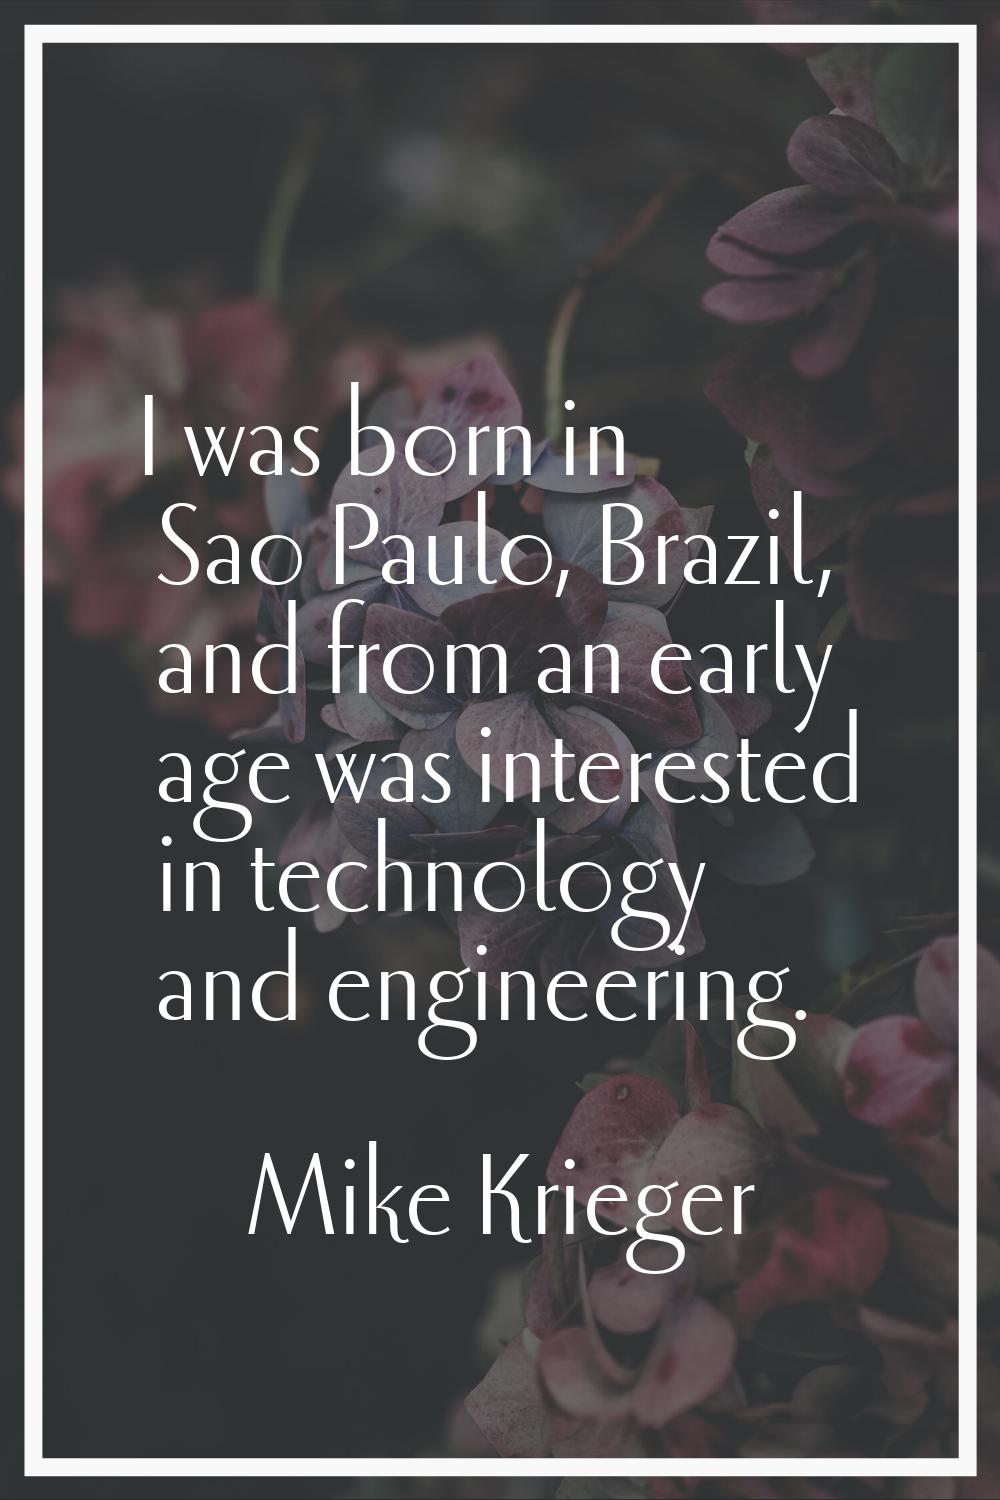 I was born in Sao Paulo, Brazil, and from an early age was interested in technology and engineering